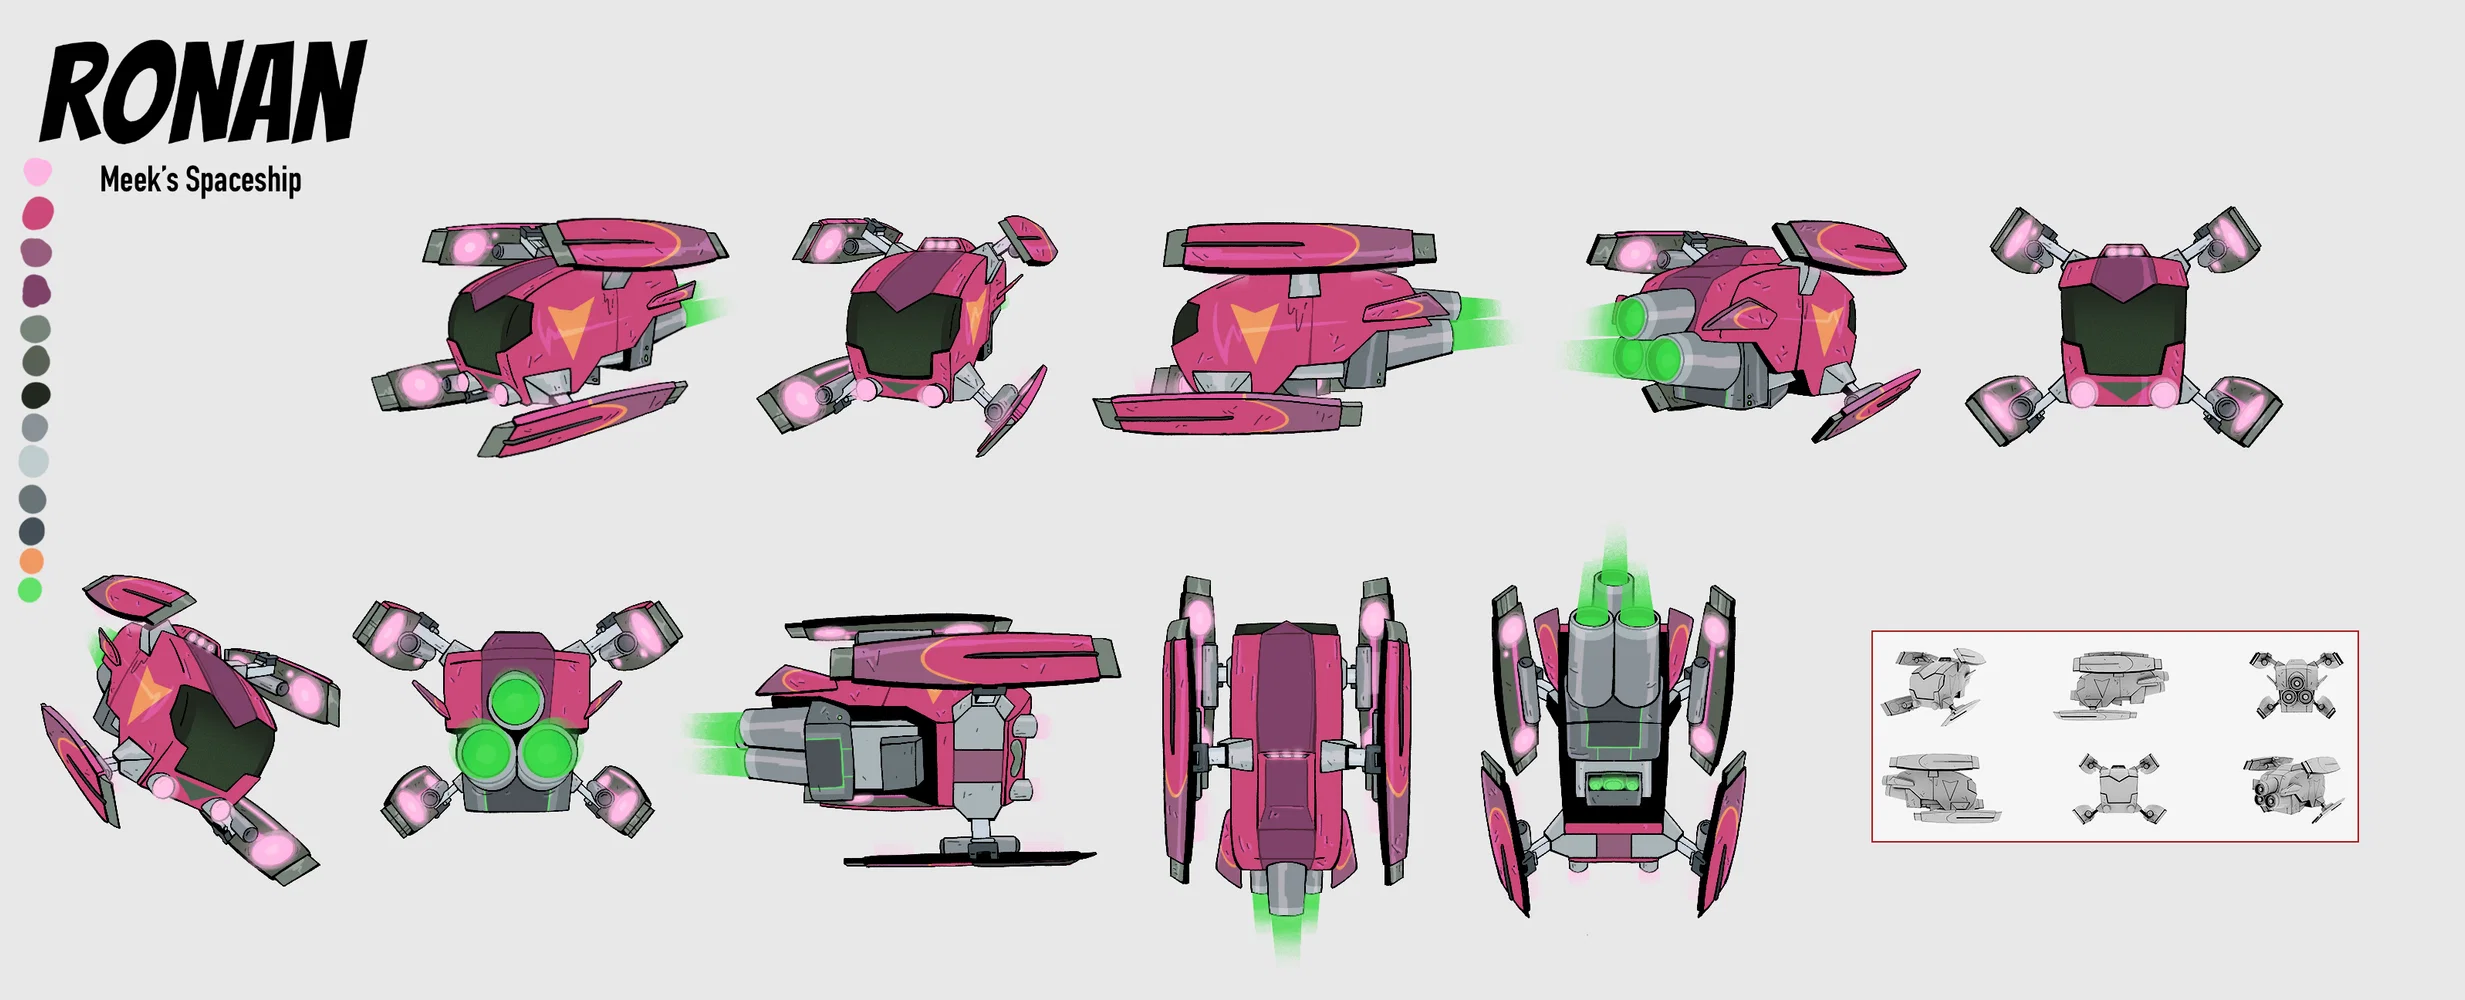 The design of a characters' spaceship.